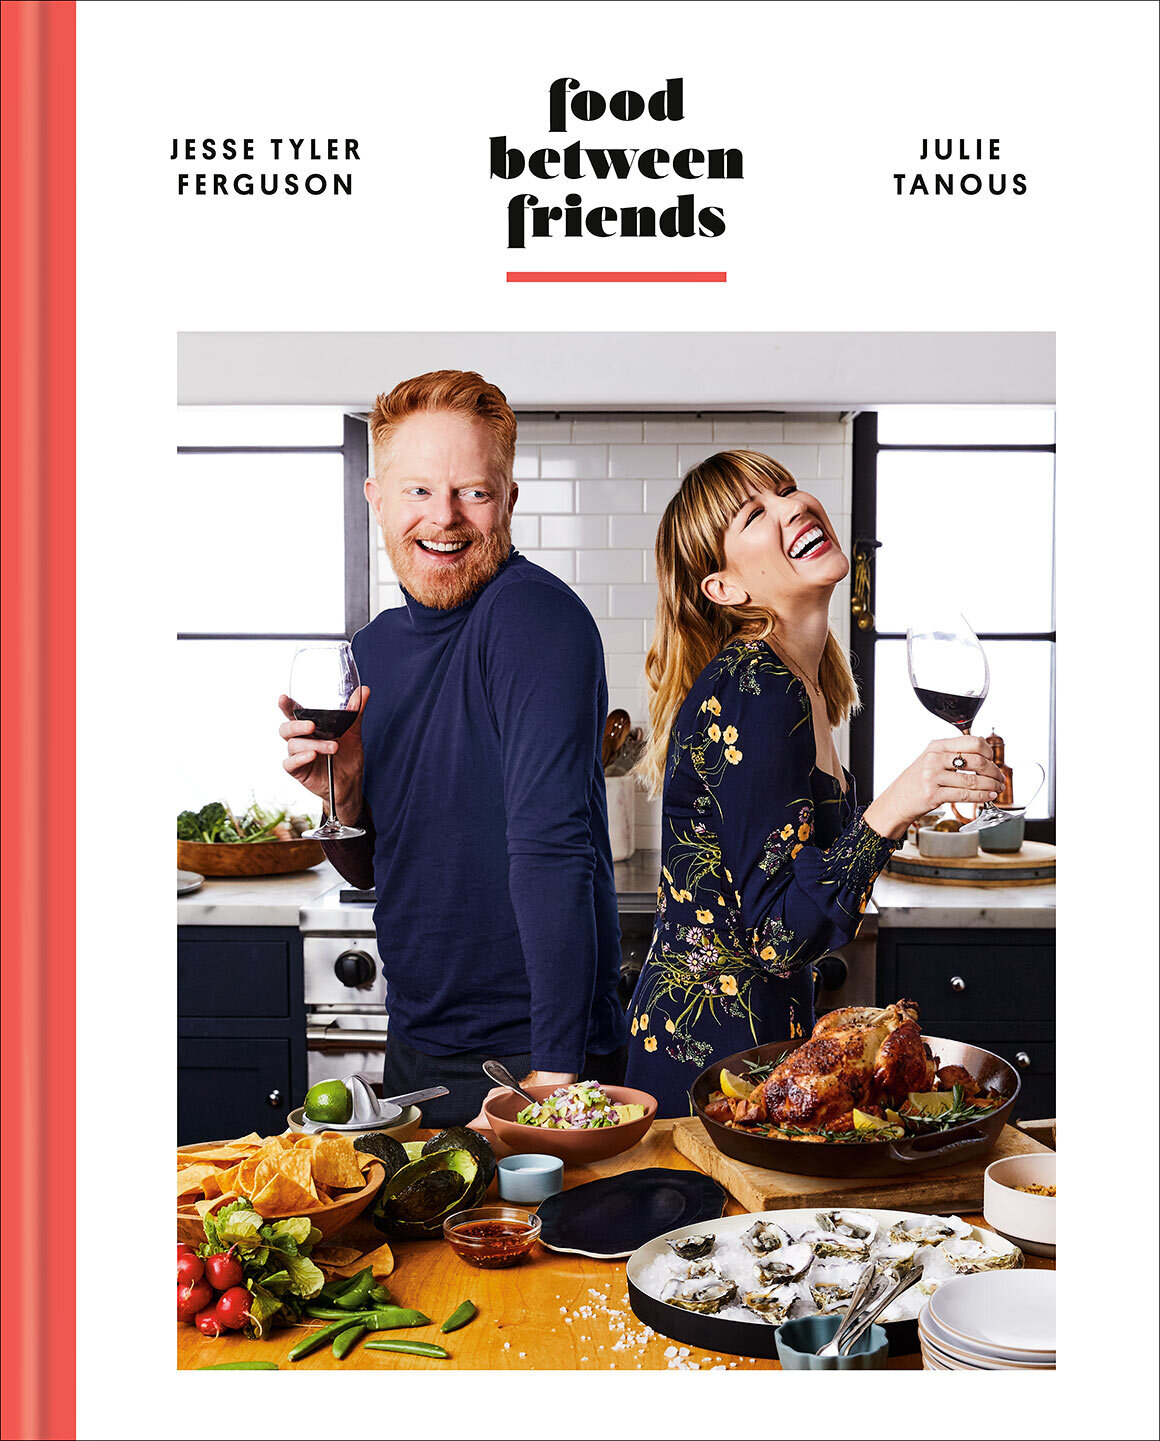 Food-between-freinds-jesse-tyler-ferguson-kitchen-recipes-learning-julie-cookbook-food-photography-lifestyle-cooking-with-family-kids-Dinner-celebrity-cover.jpg